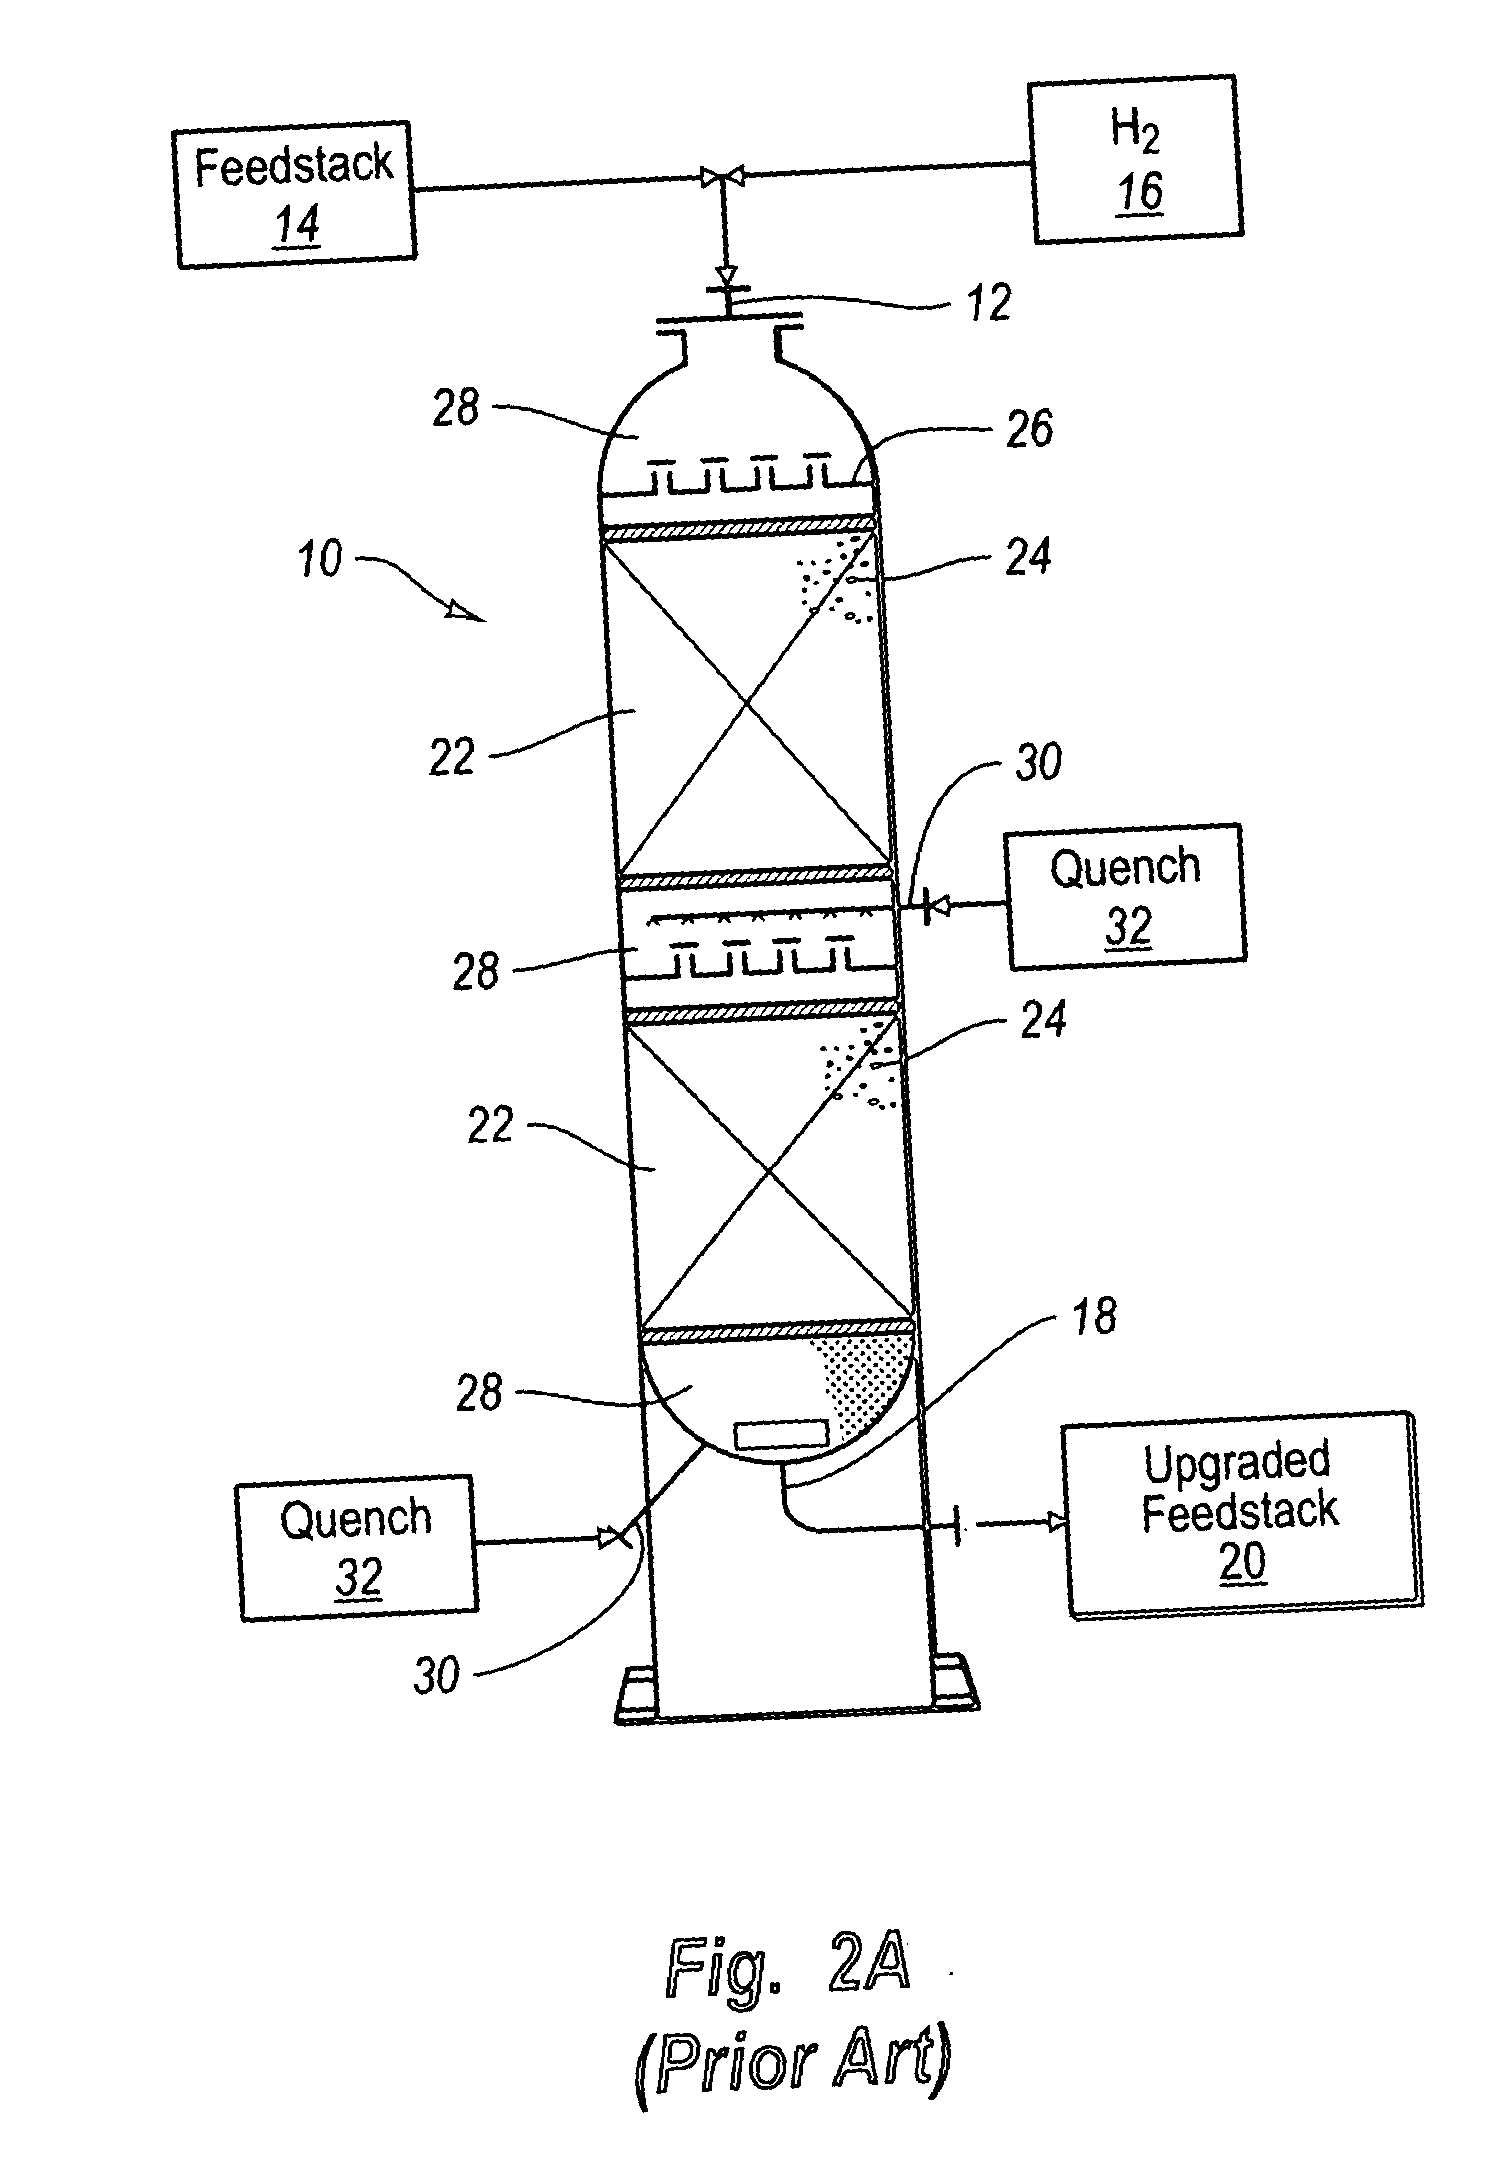 Fixed bed hydroprocessing methods and systems and methods for upgrading an existing fixed bed system